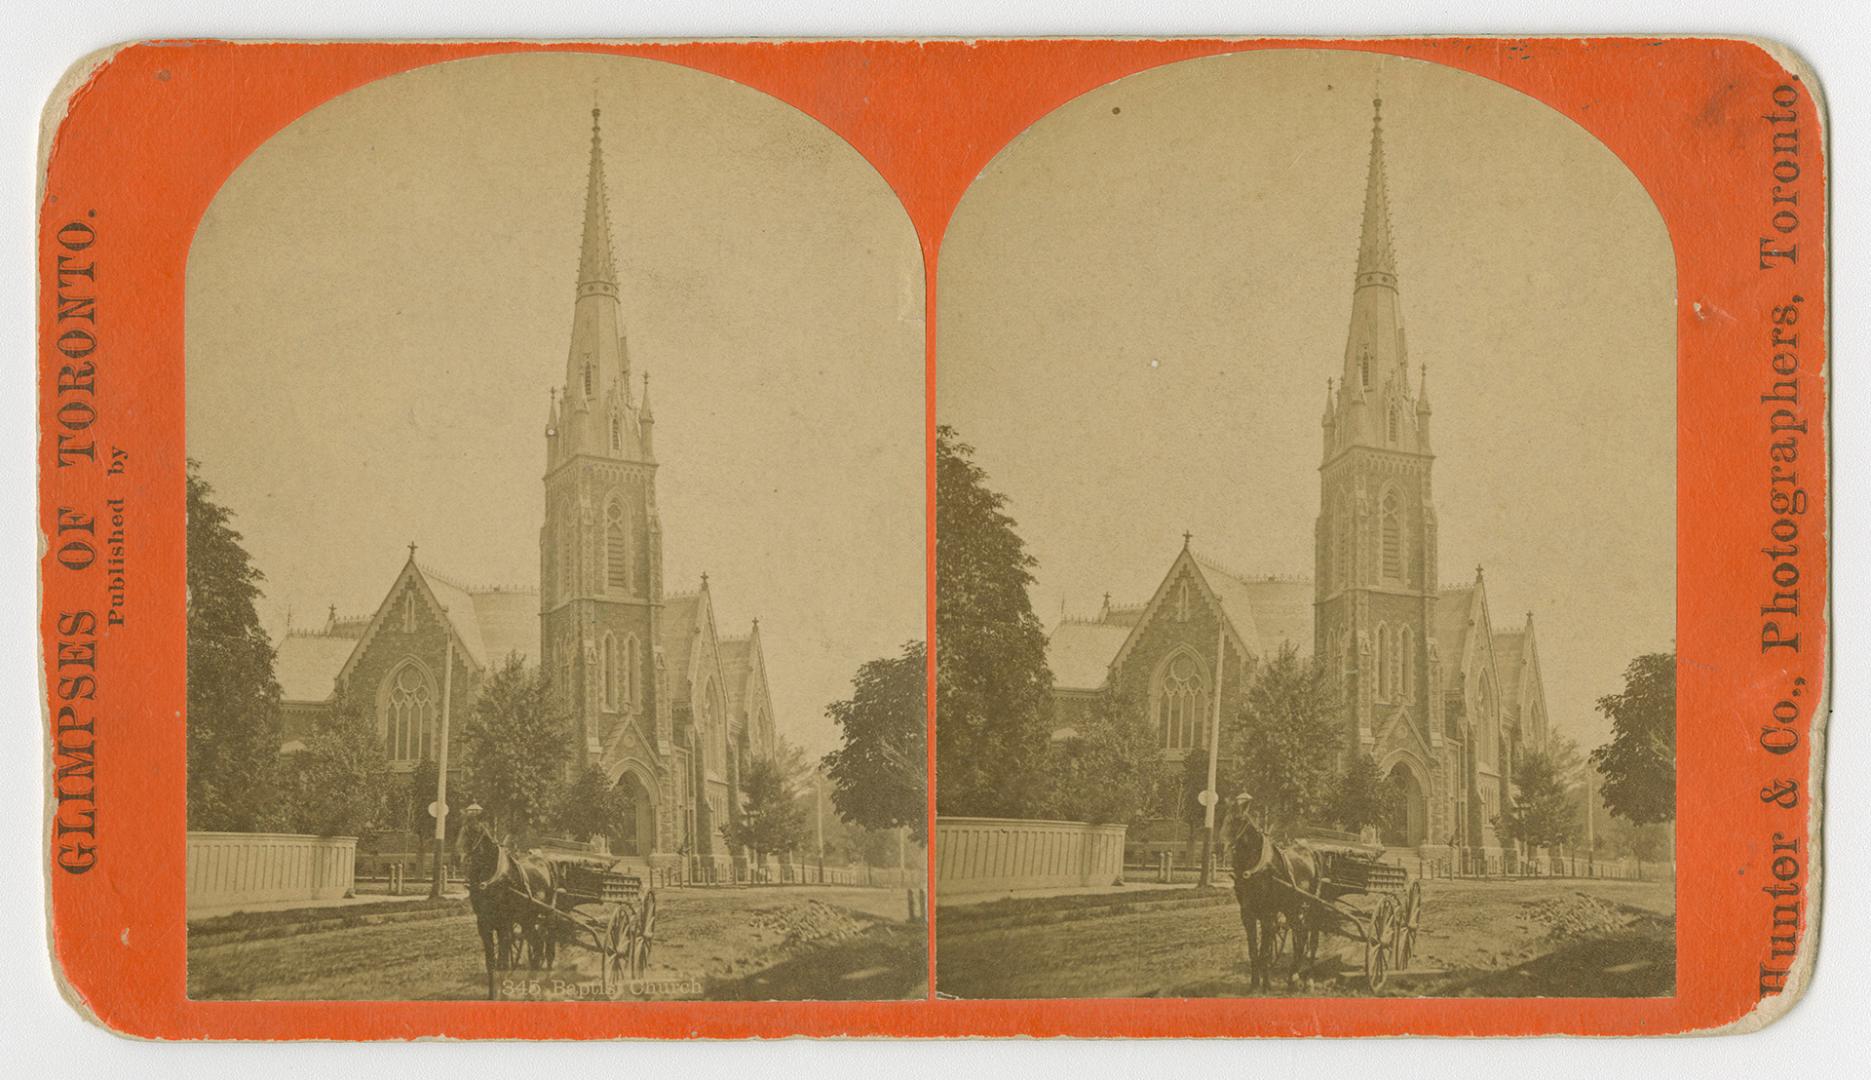 Pictures show a horse and cart on a road in front of a gothic revival style church with a tall  ...